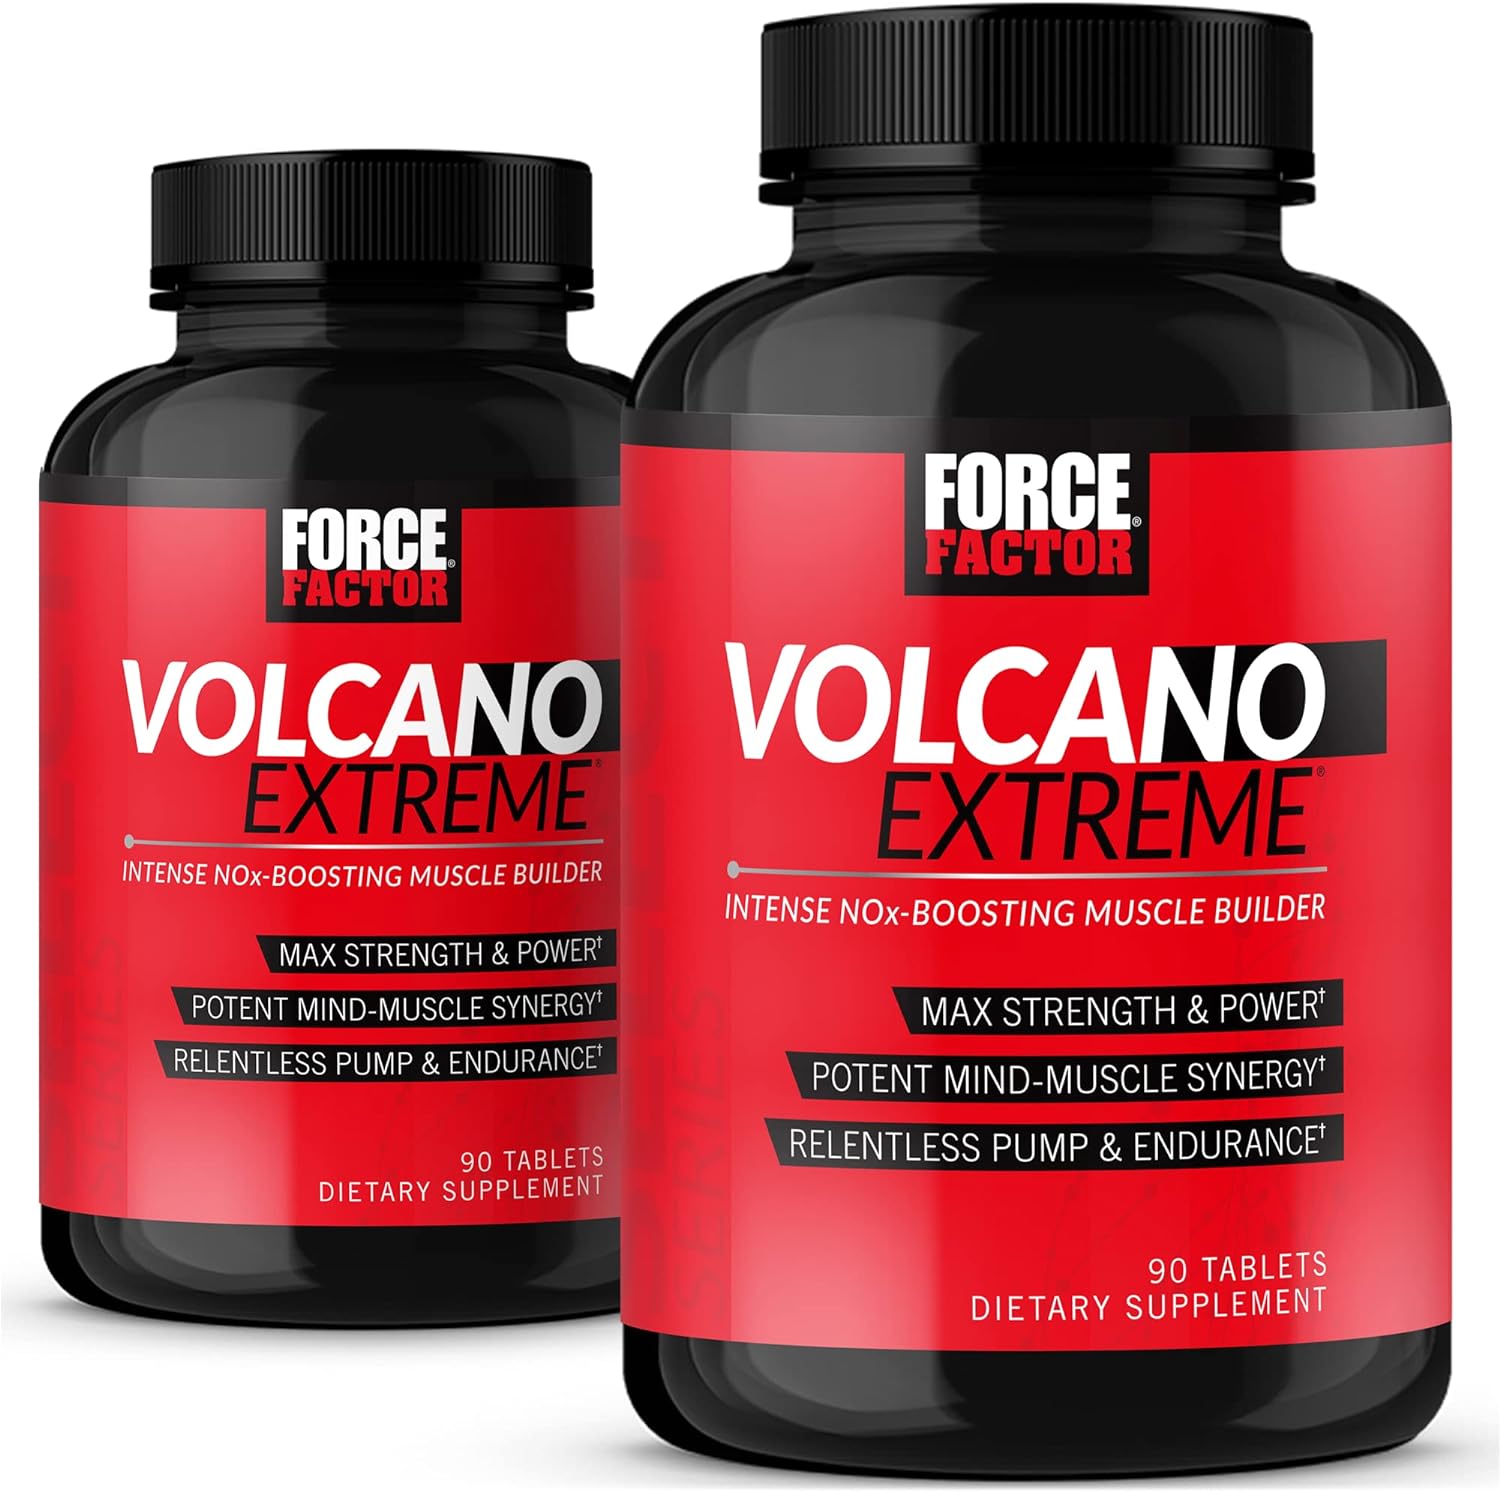 FORCE FACTOR Volcano Extreme, Pre Workout Nitric Oxide Booster Supplement for Men with Creatine, L-Citrulline, and Huperzine A for Better Muscle Pumps, 90 Count (Pack of 2)